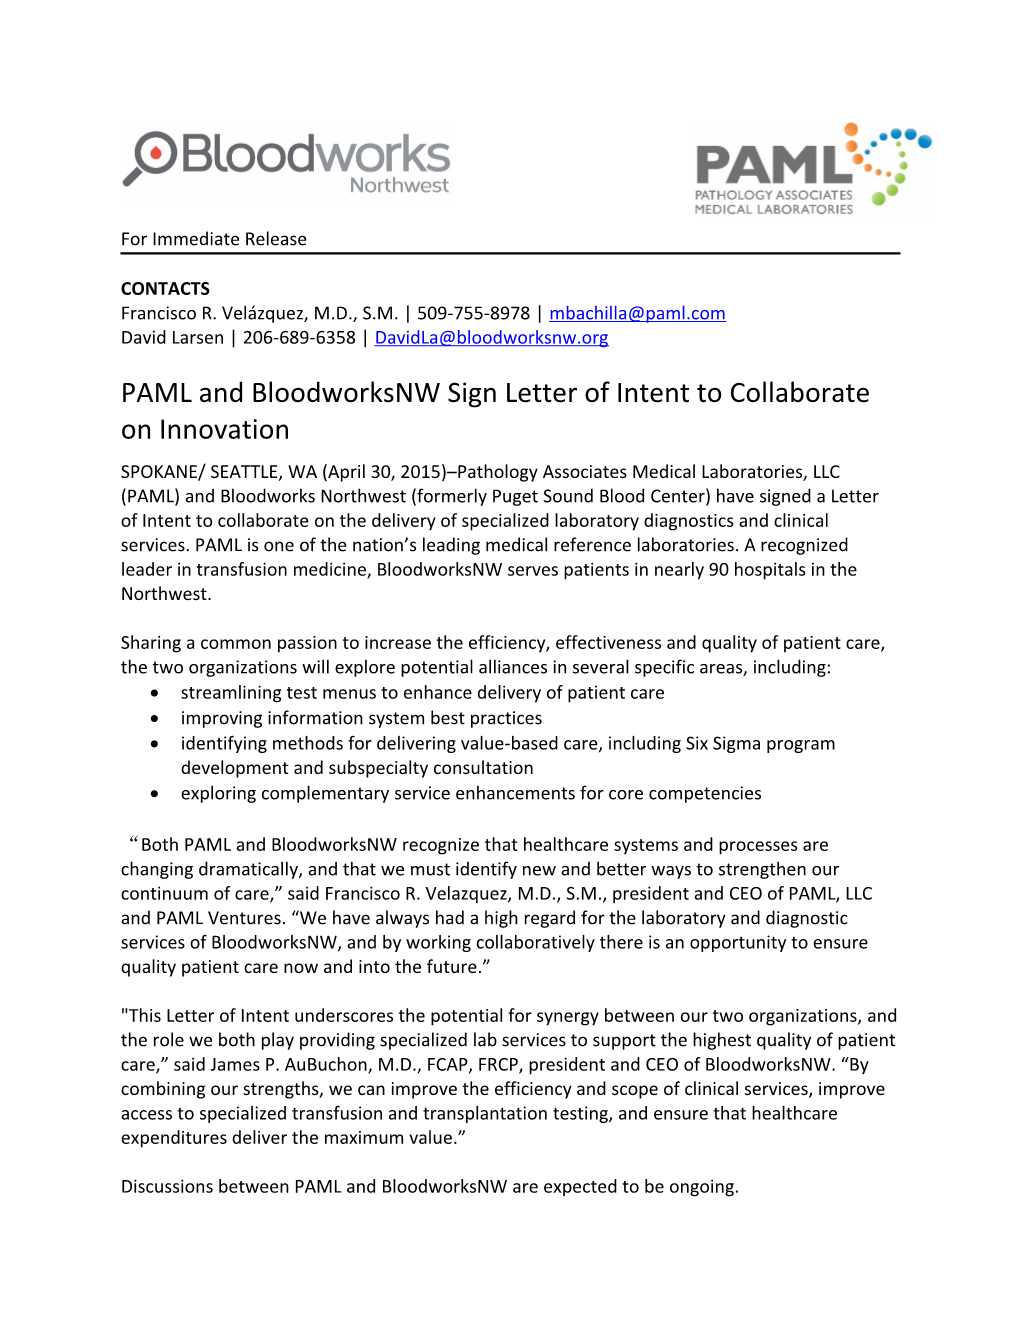 PAML and Bloodworksnw Sign Letter of Intent to Collaborate on Innovation